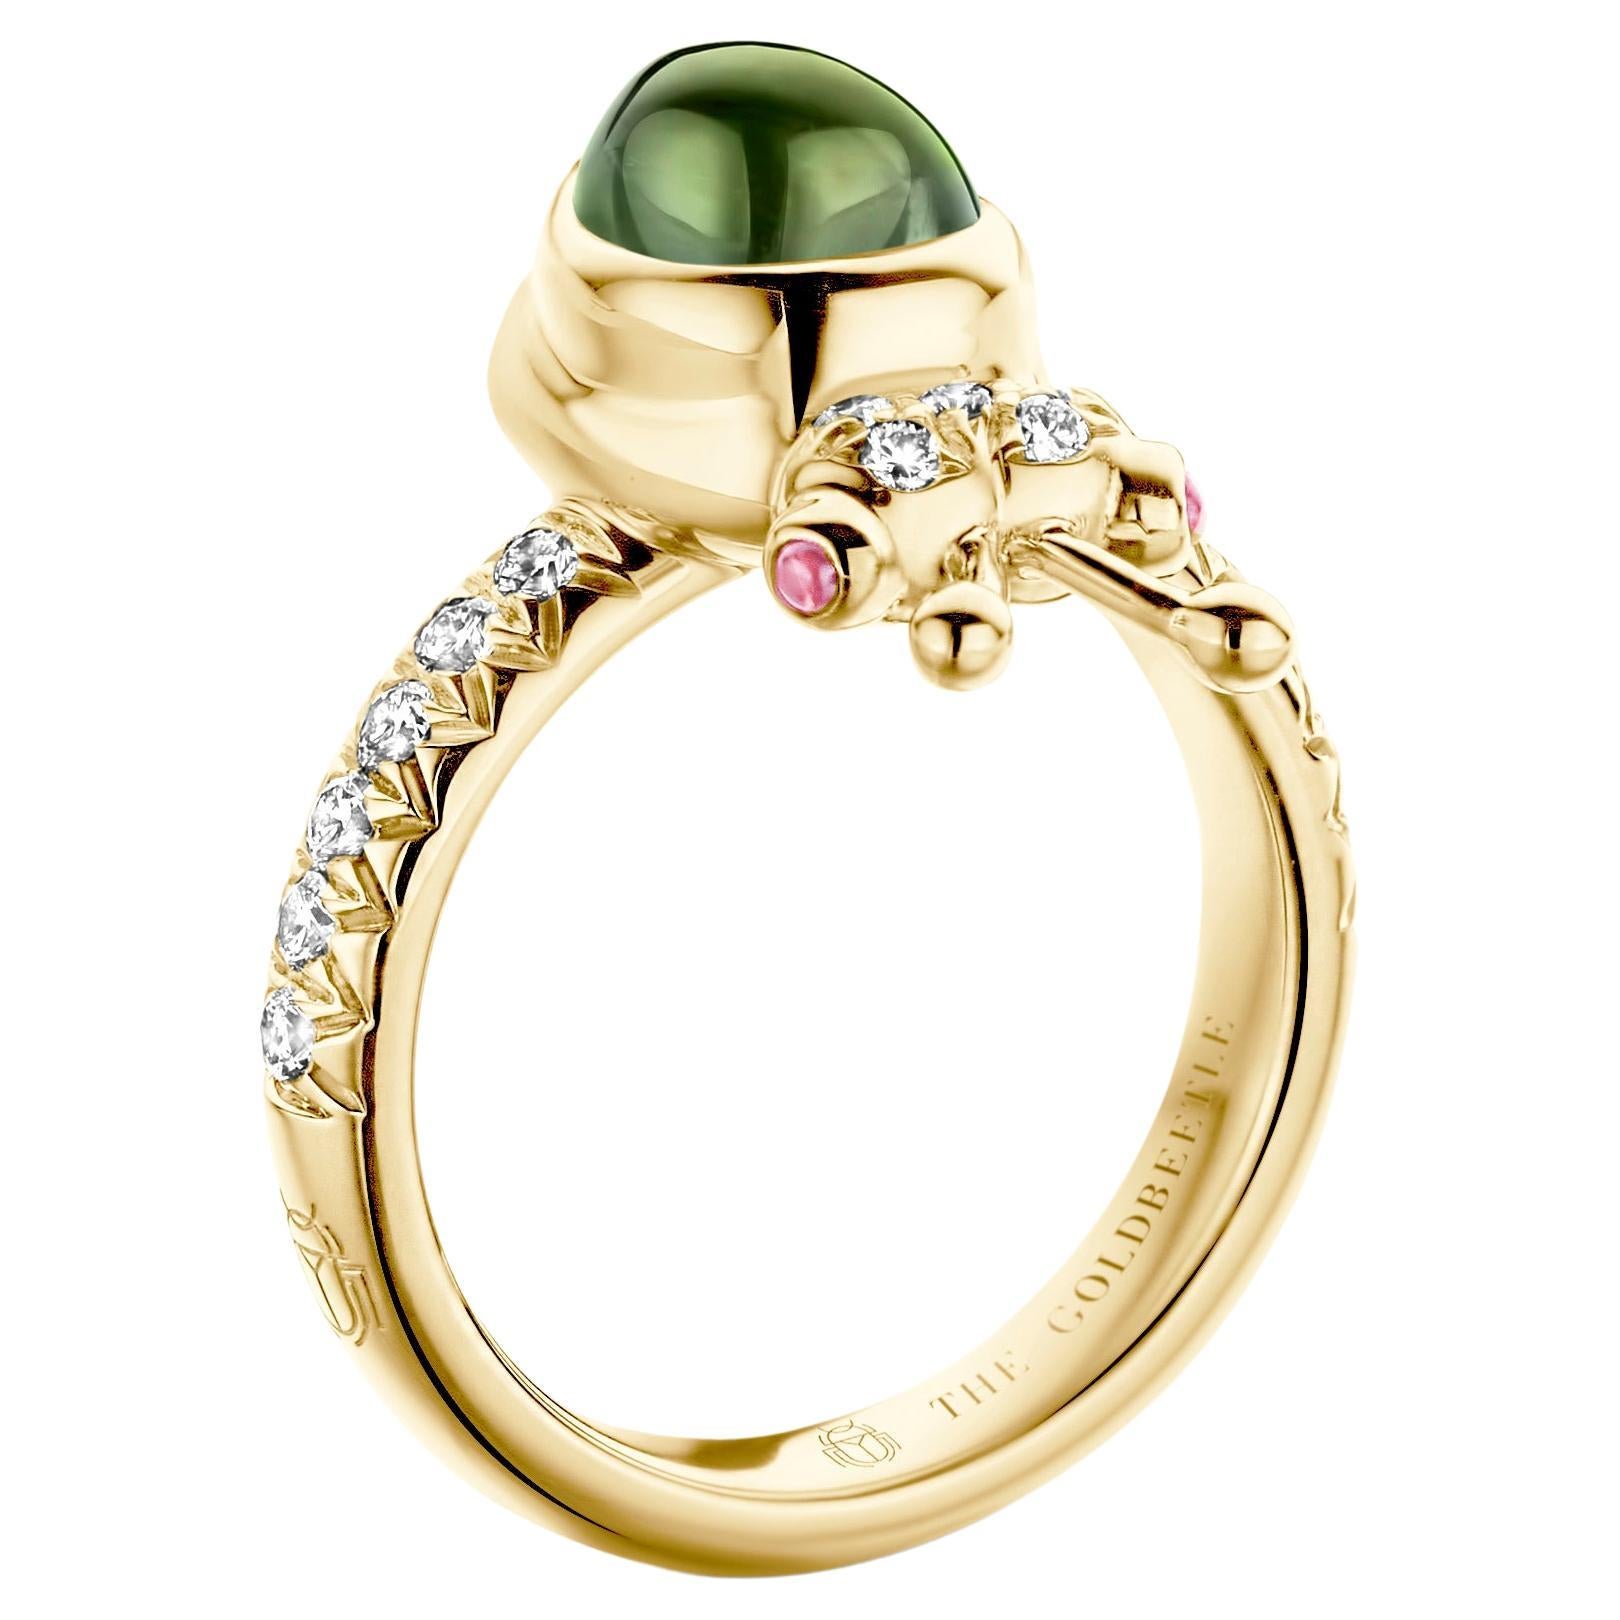 One-of-a-kind lucky beetle ring in 18-Karat yellow gold 8,6 g set with the finest diamonds in brilliant cut 0,34 Carat (VVS/DEF quality) one natural, green tourmaline in pear cabochon cut and two pink tourmalines in round cabochon cut.
Celine